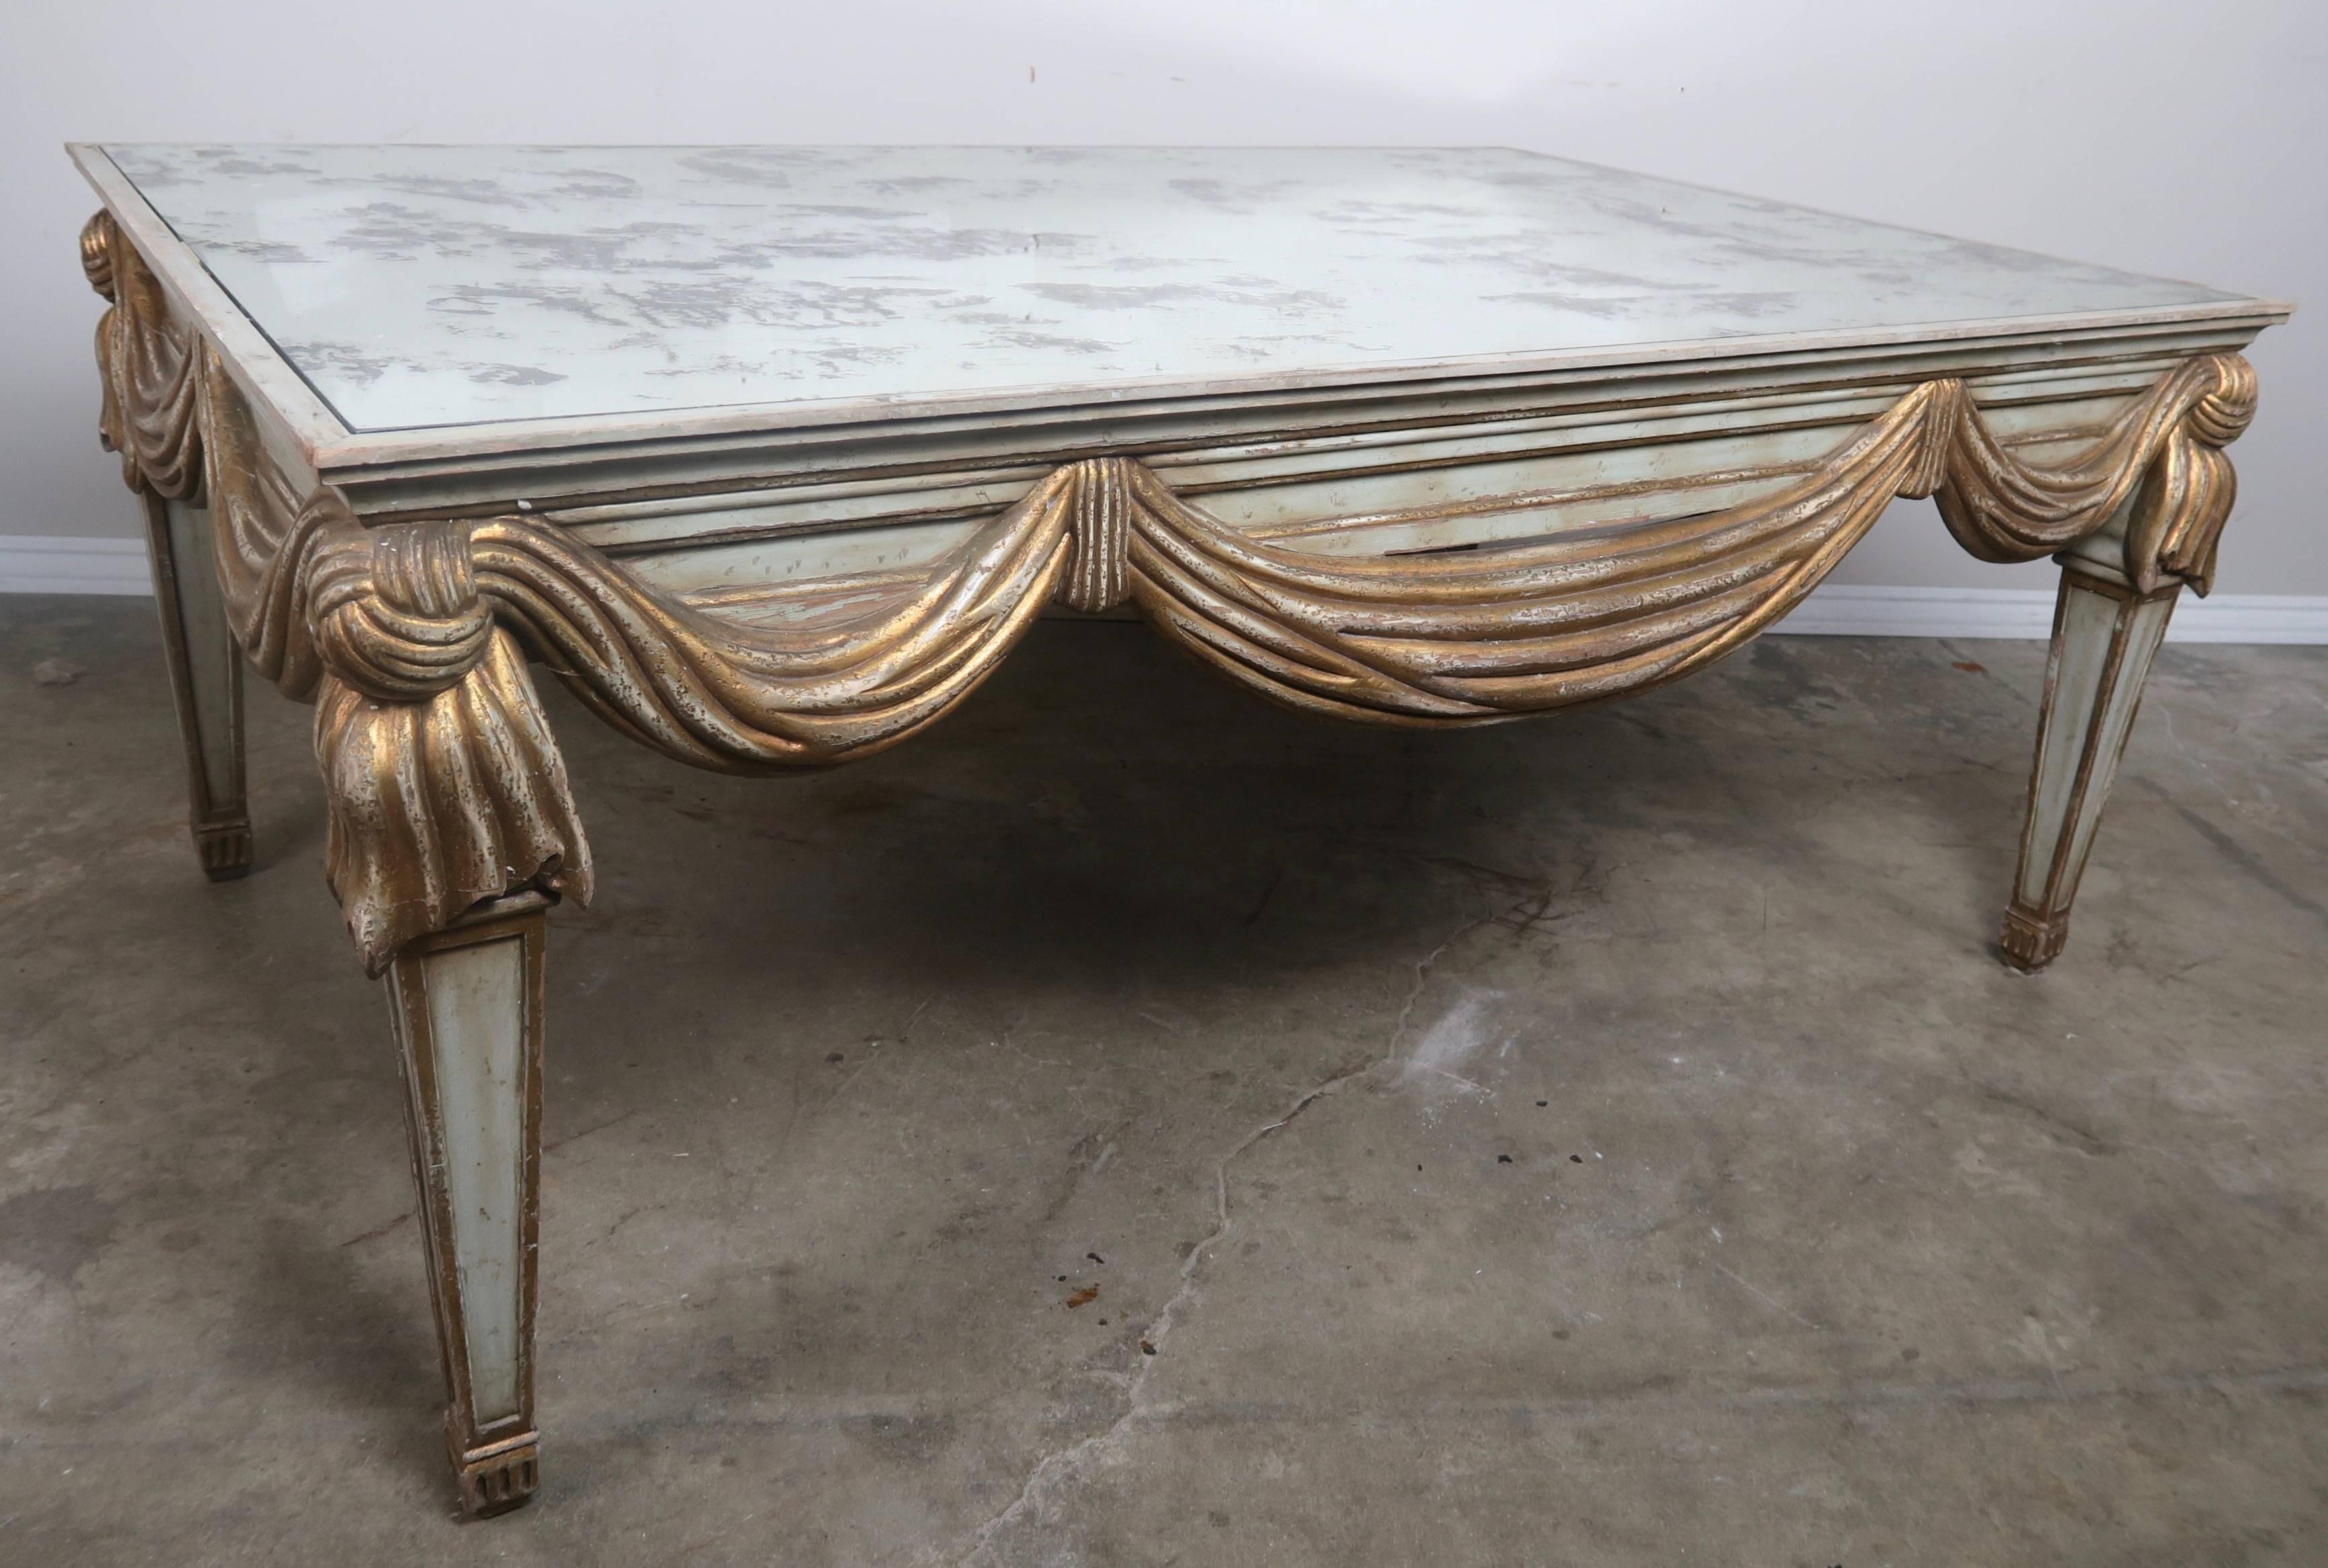 20th Century Italian Painted and Parcel-Gilt Mirrored Top Coffee Table